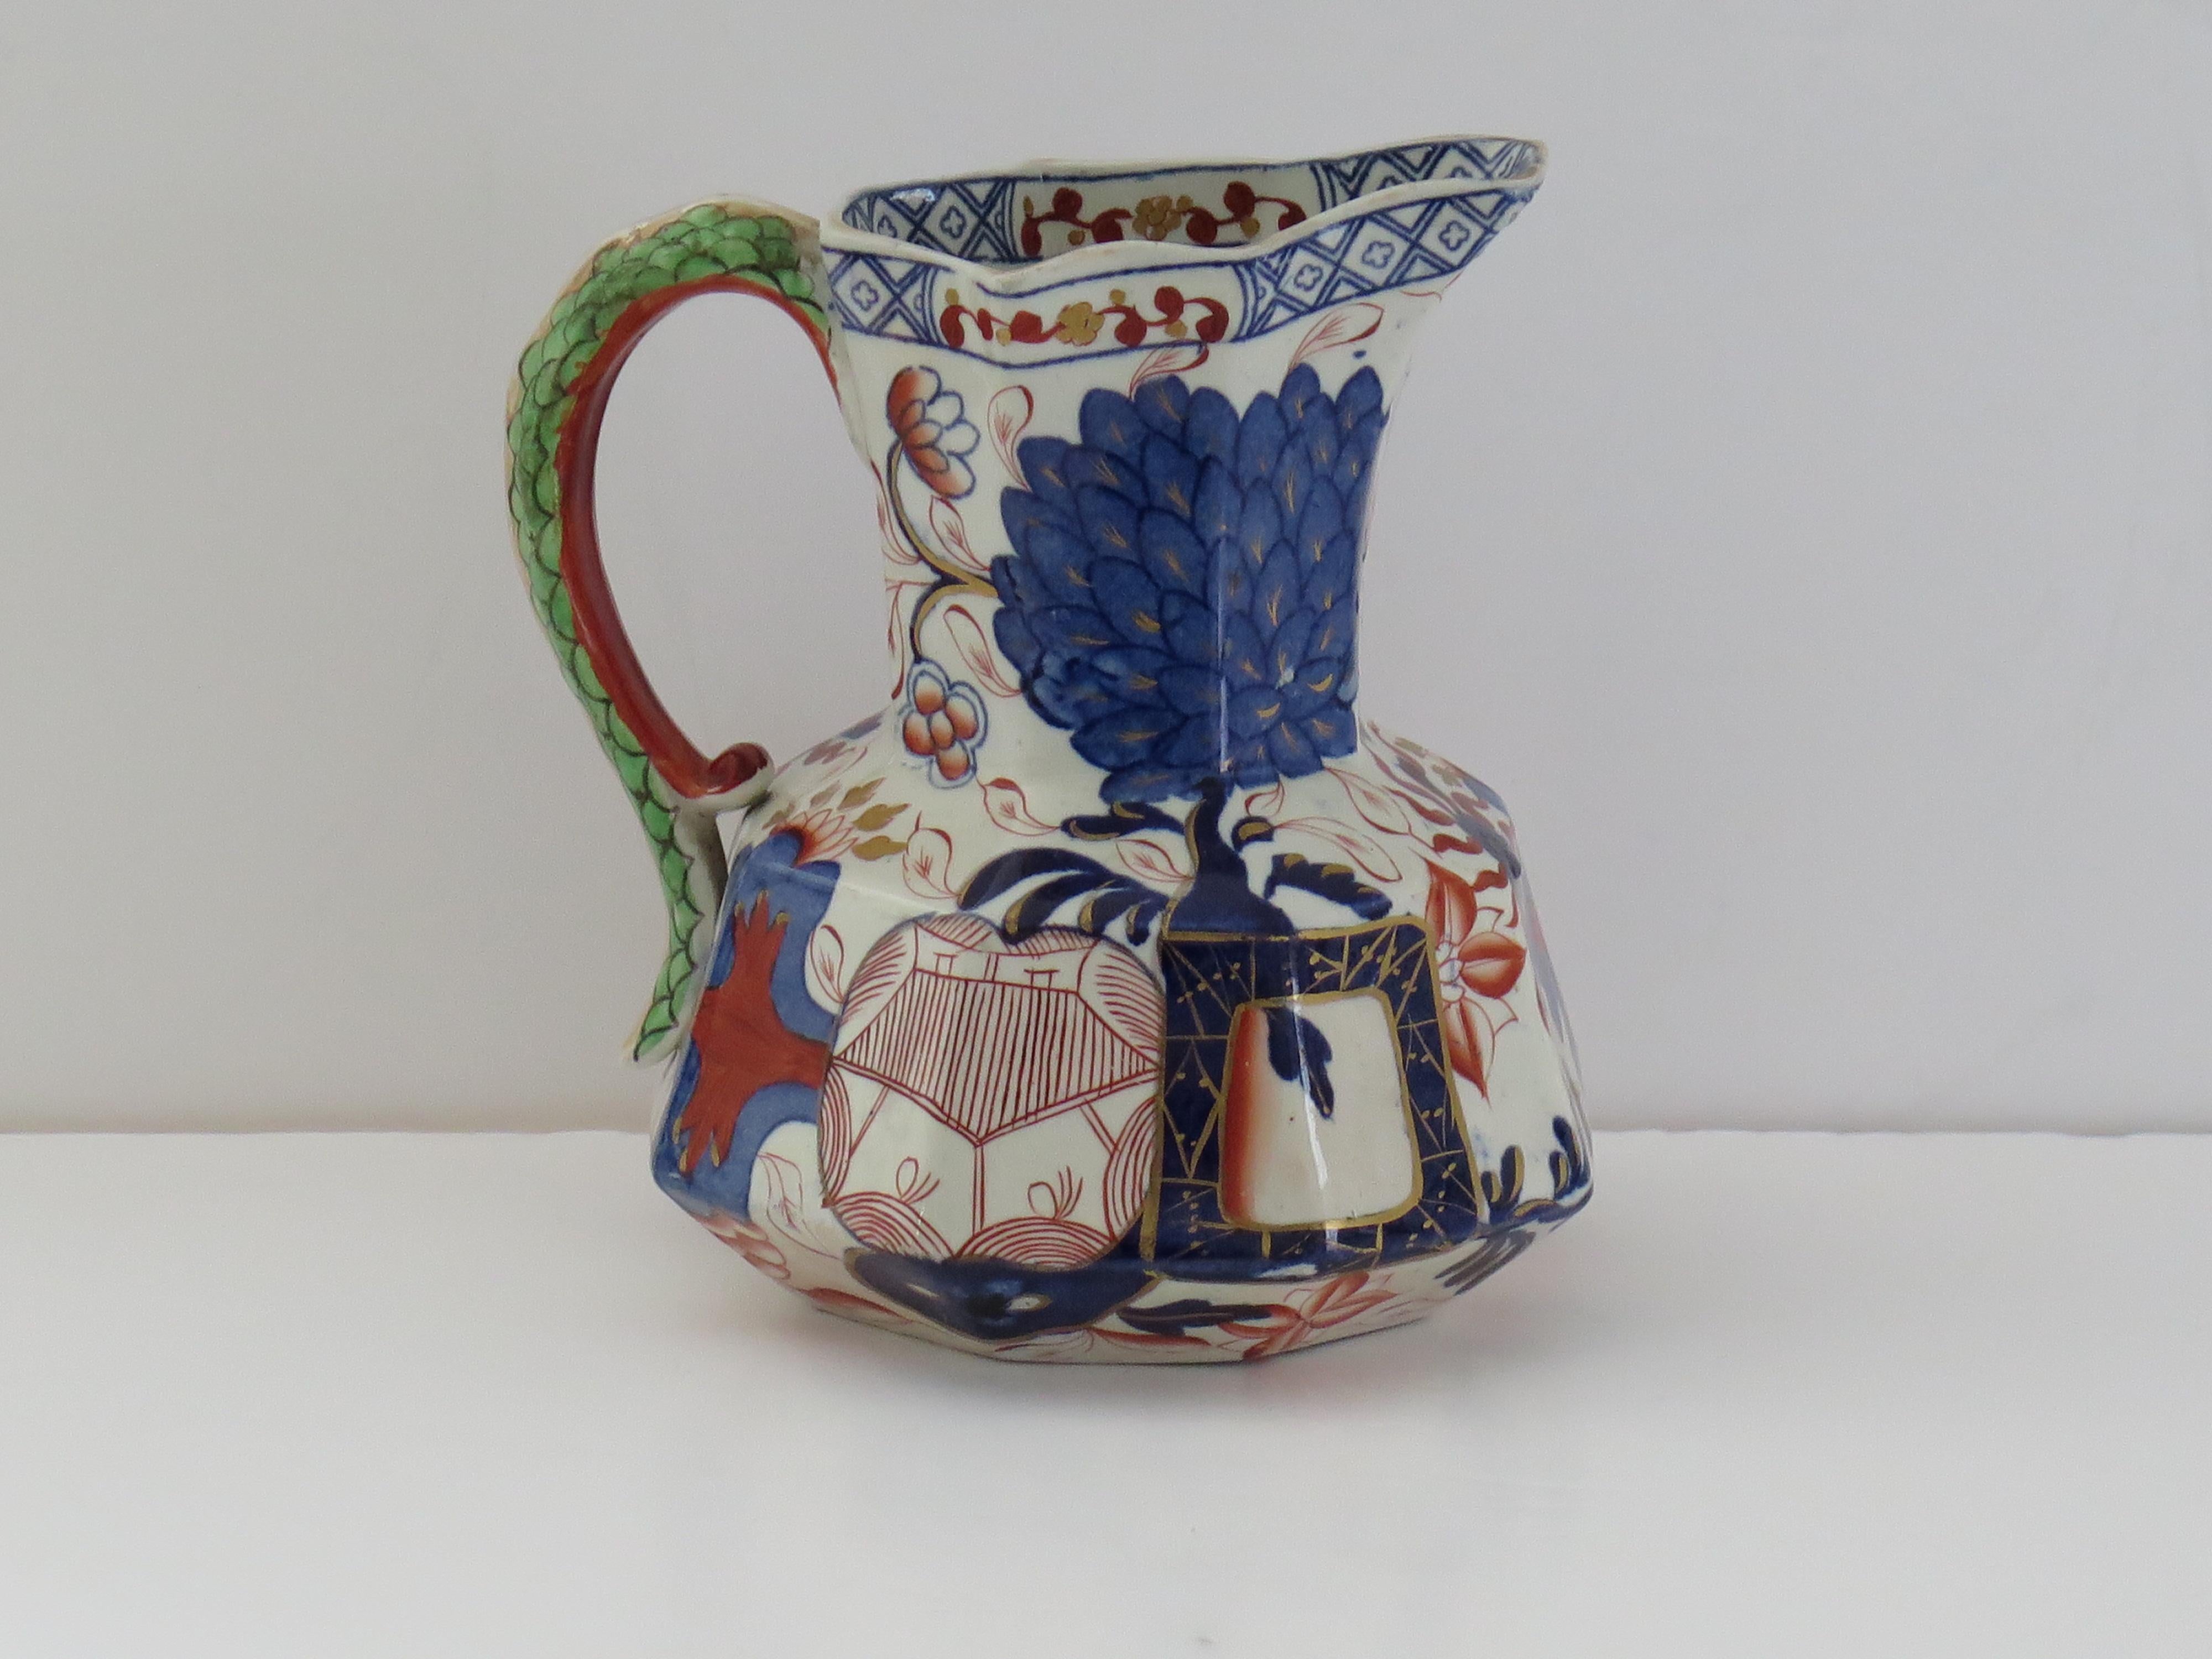 This is a very good mid to large size Hydra jug or Pitcher made by the Davenport Company of Longport, Staffordshire, England in the late Georgian period, circa 1805-1820, made of Ironstone pottery, which Davenport called Stone China.

It is hand